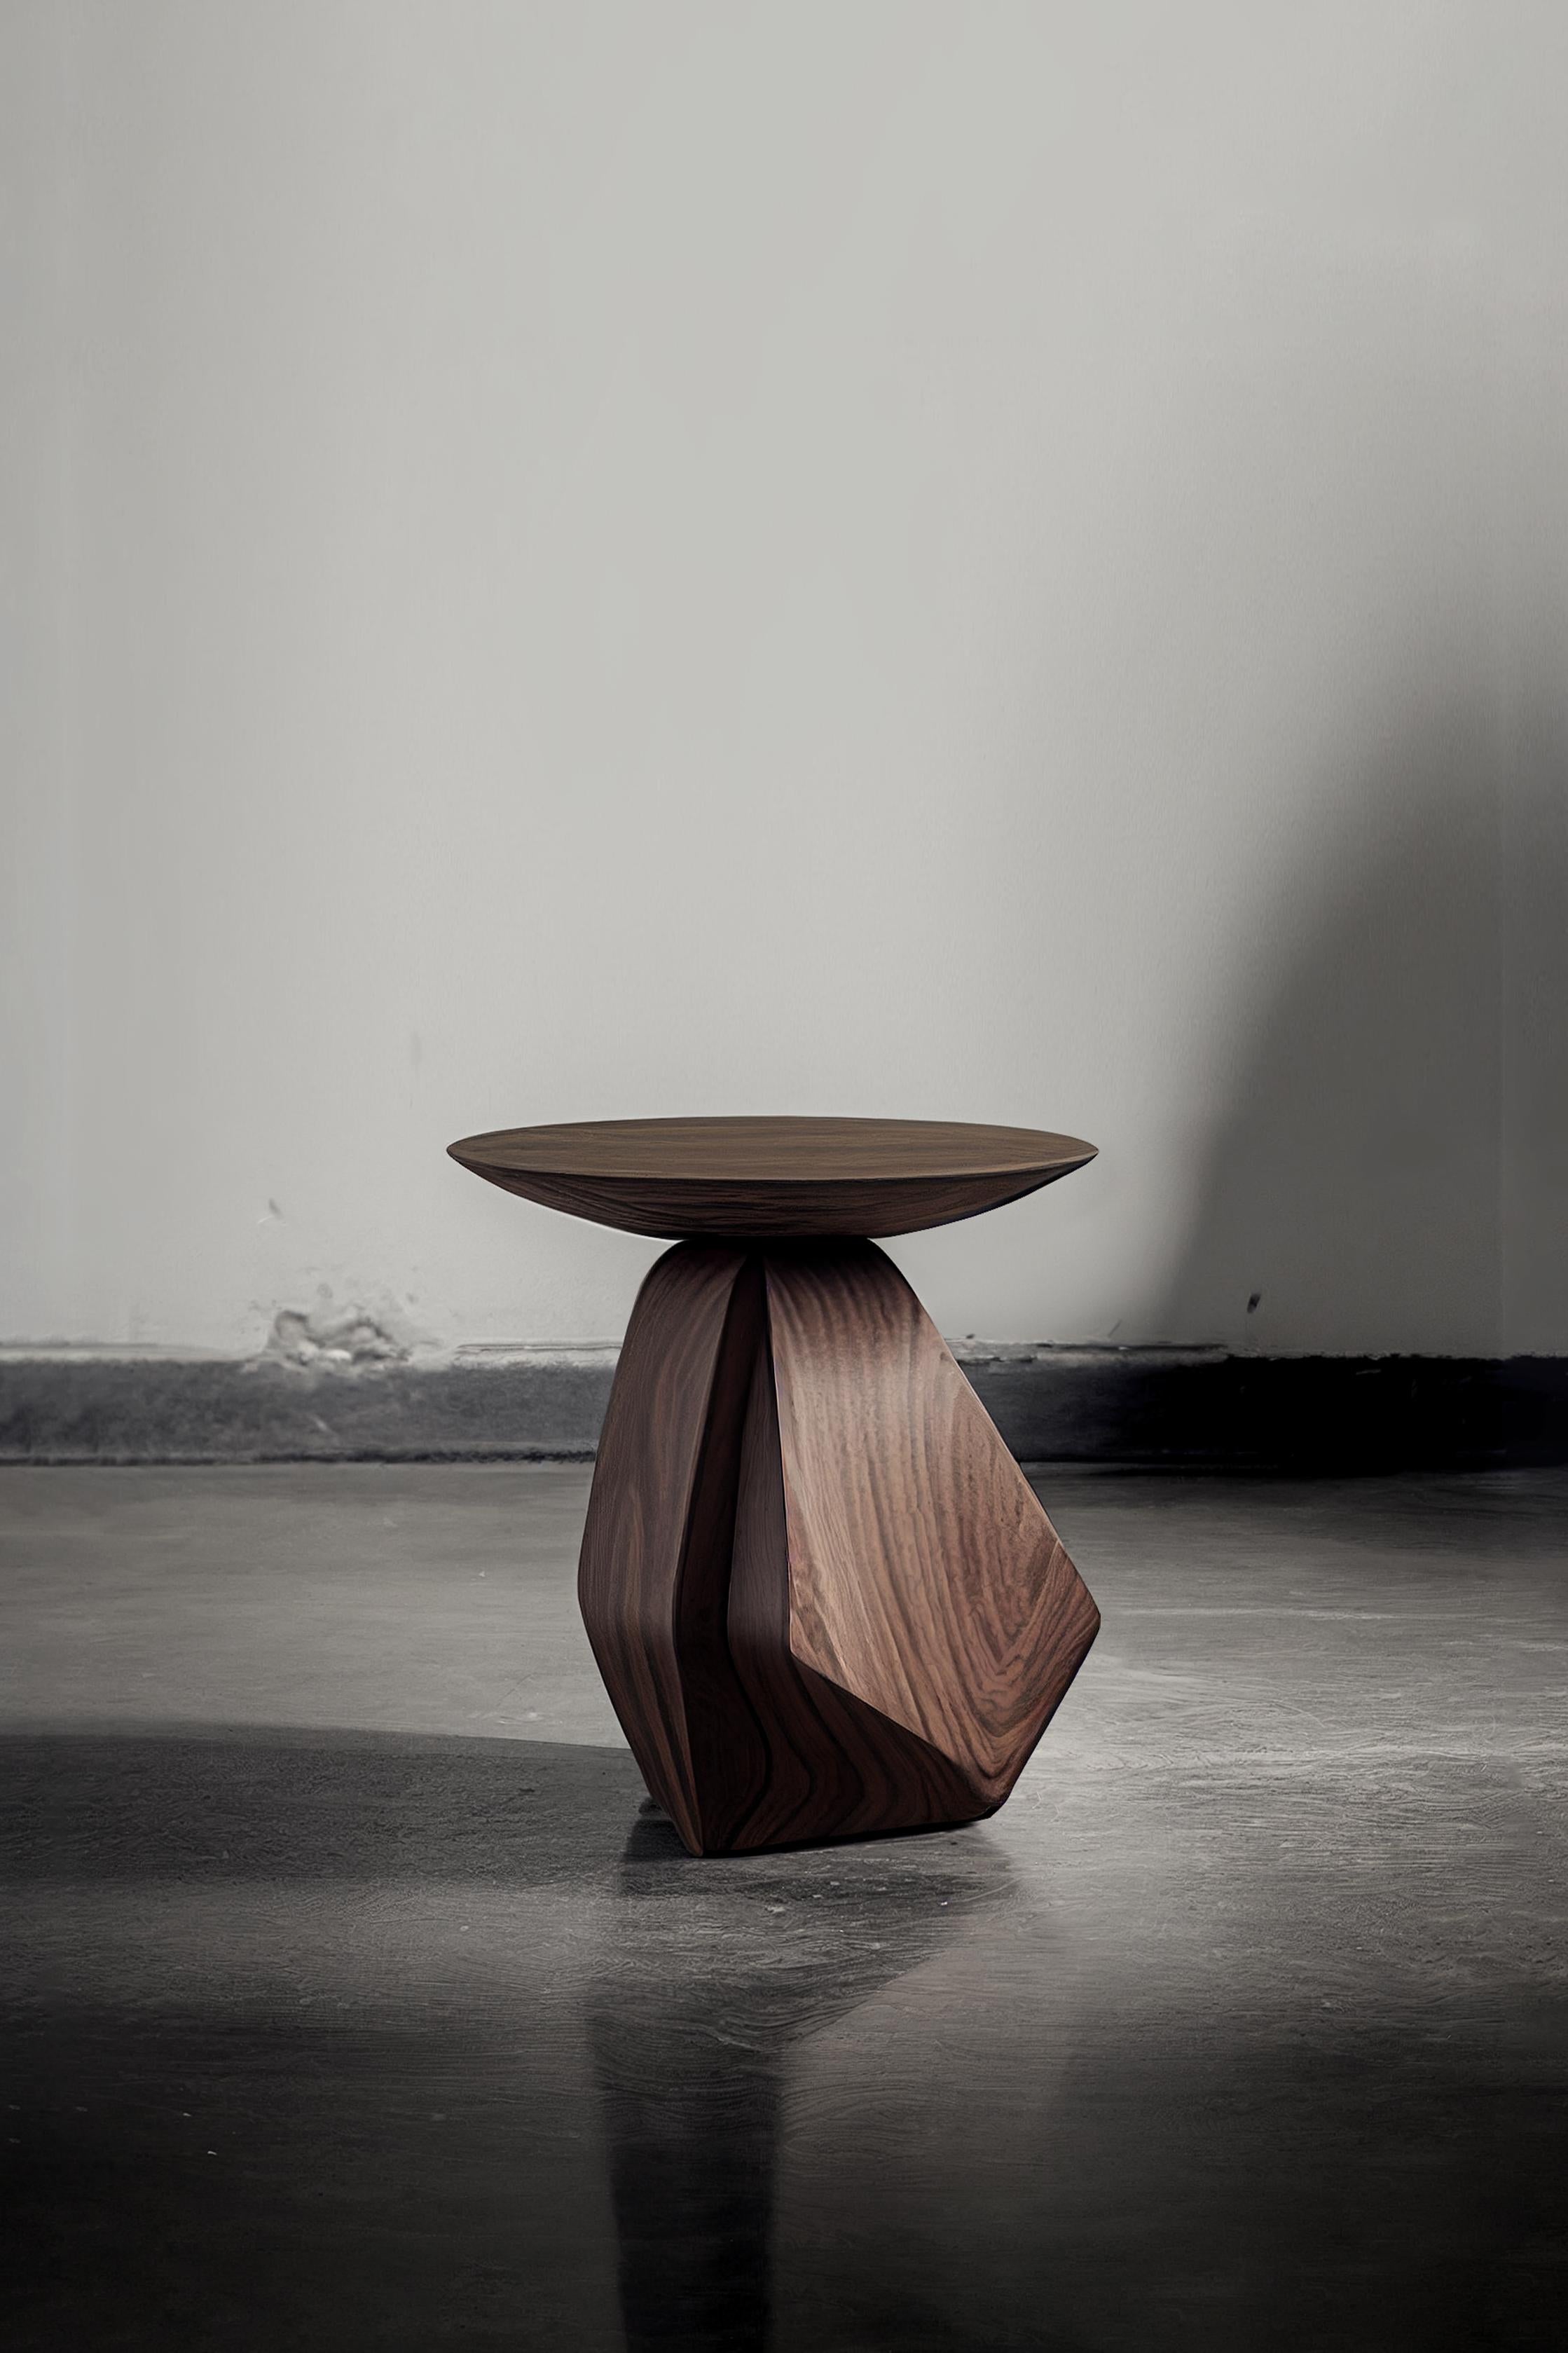 Sculptural side table made of solid walnut wood, nightstand, auxiliary table Solace S7 by Joel Escalona.

The Solace side table series, designed by Joel Escalona, is a furniture collection that exudes balance and presence, thanks to its sensuous,